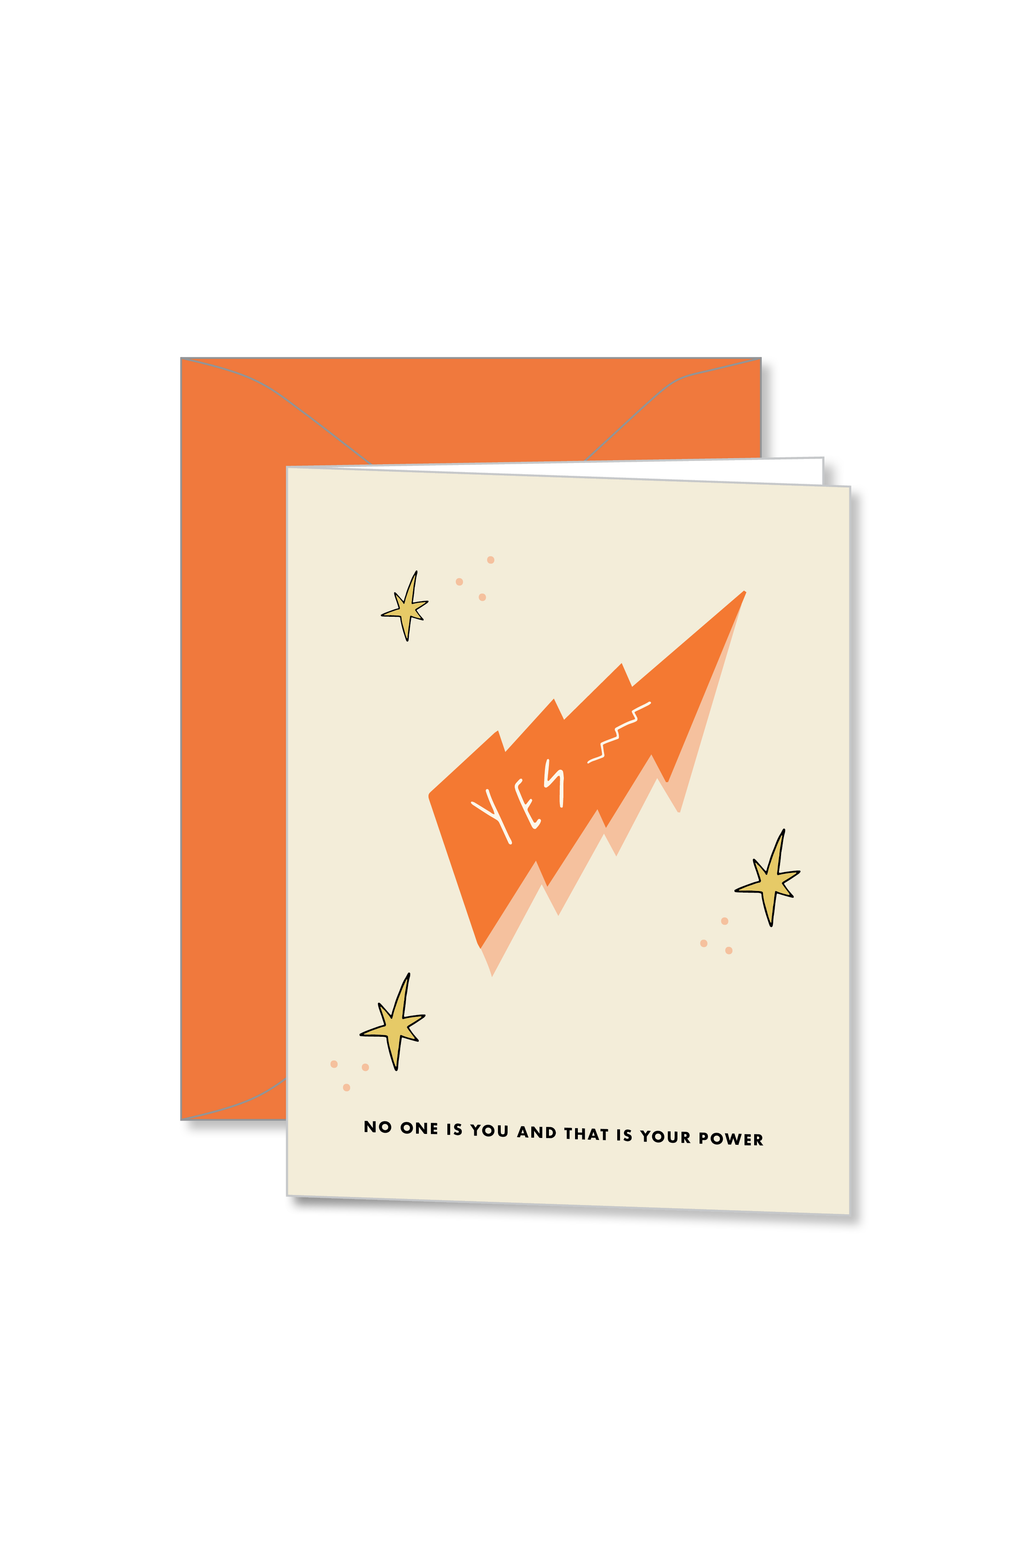 Cream notecard with orange lightning and yellow stars design and no one is you and that is your power text design by Ramble and Co. | you can shop now at  shop.rambleandcompany.com or visit our storefront in downtown Wichita Falls, Texas || small batch + hand printed tees | home goods | paper goods | gifts + more